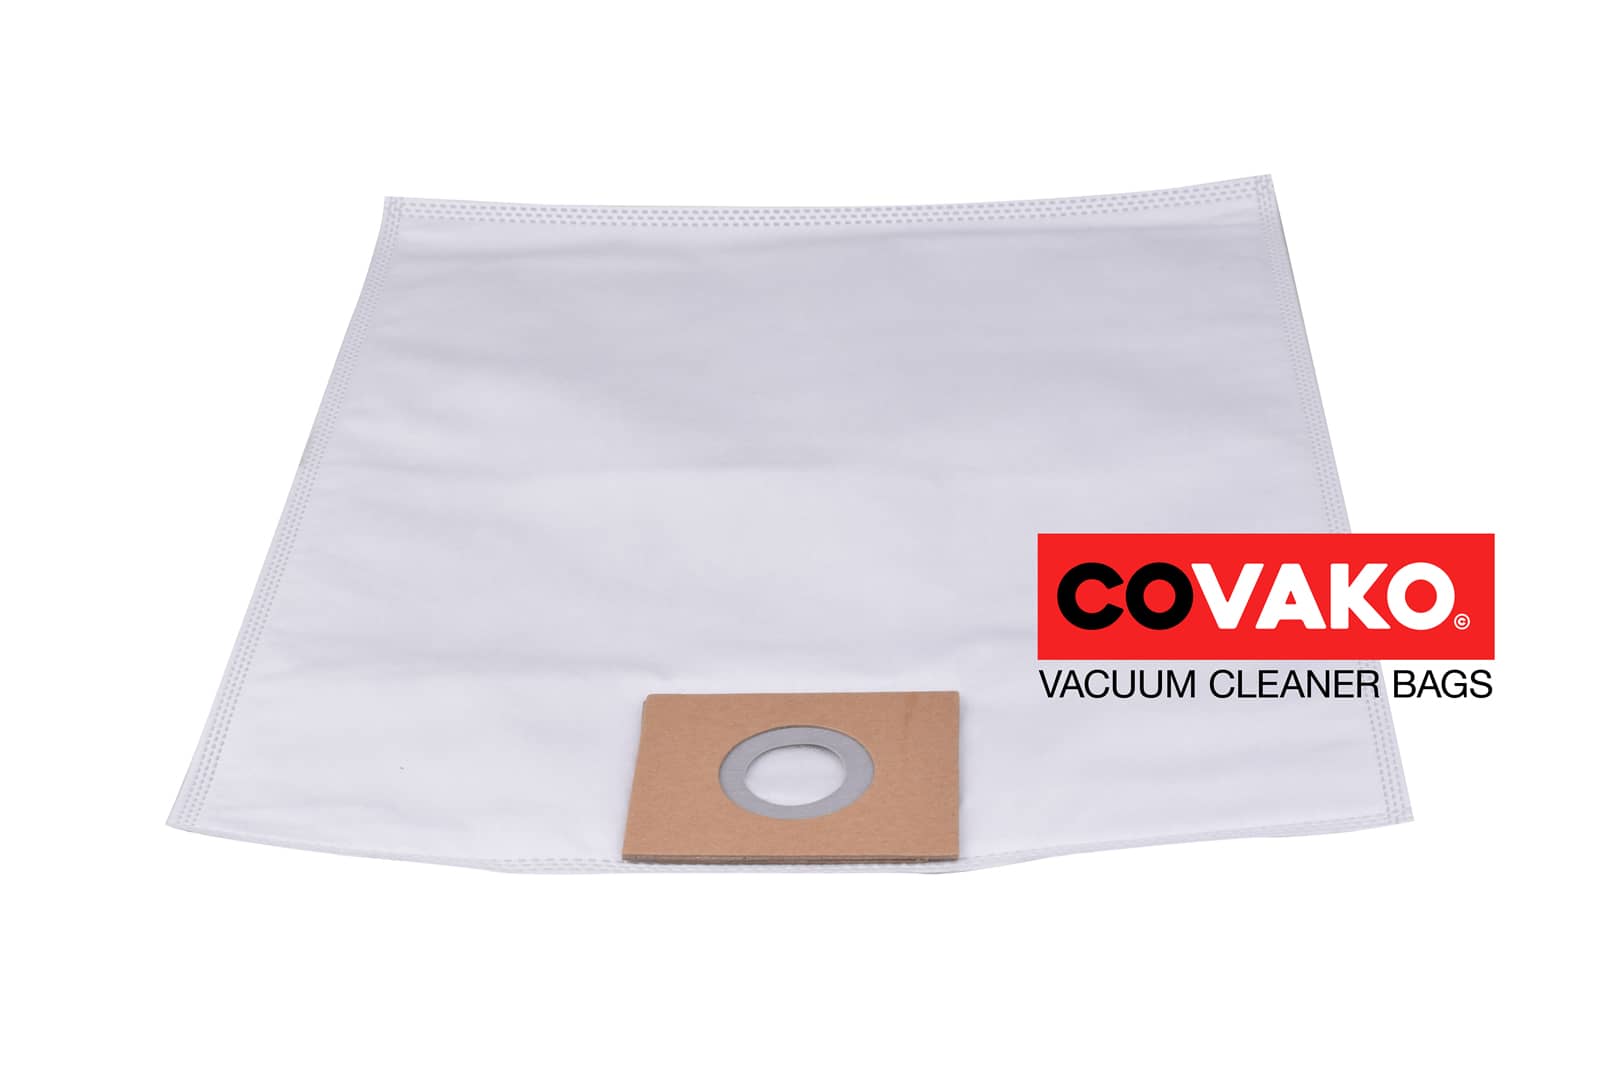 Fimap FV 15 / Synthesis - Fimap vacuum cleaner bags